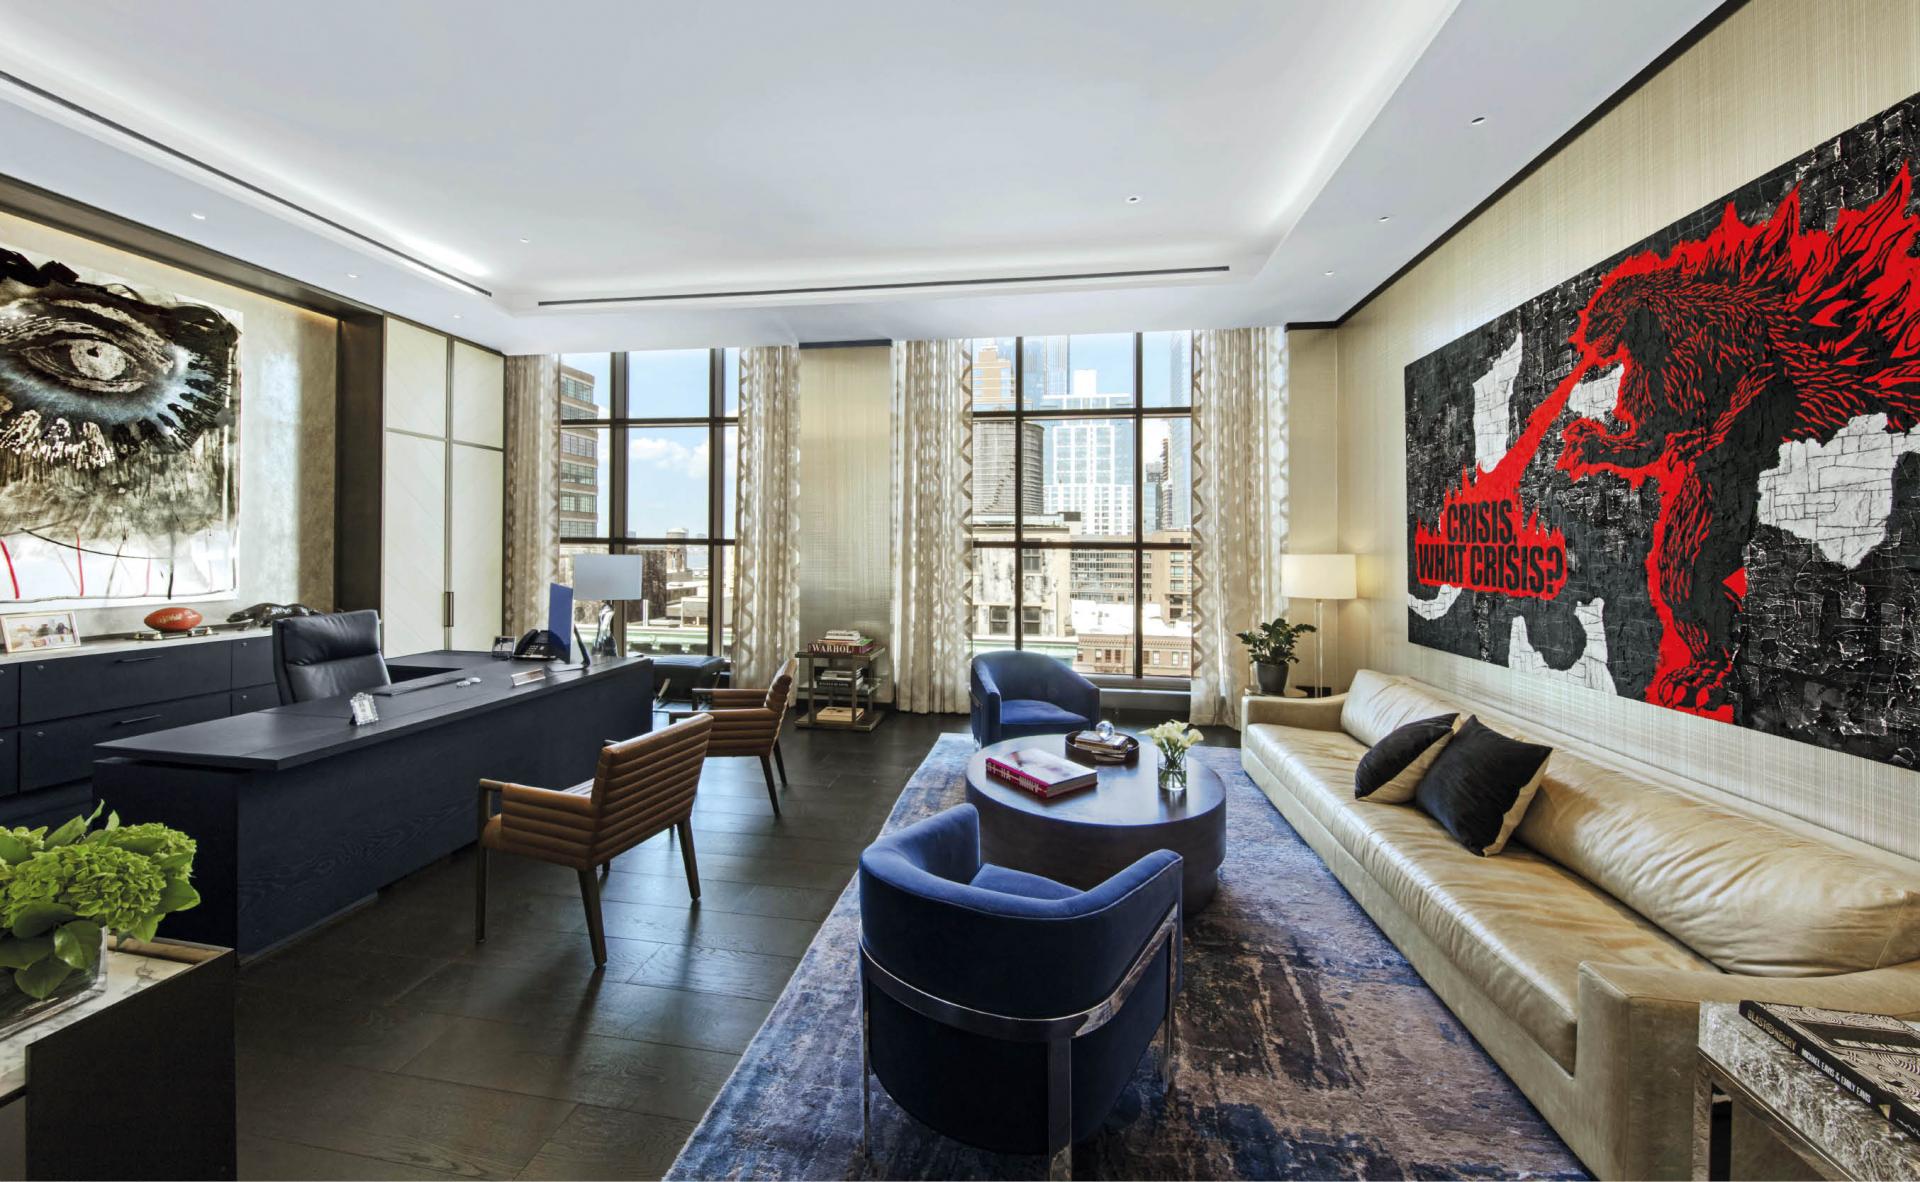 Wondrous Art Abounds in Jay-Z’s New York Roc Nation Headquarters